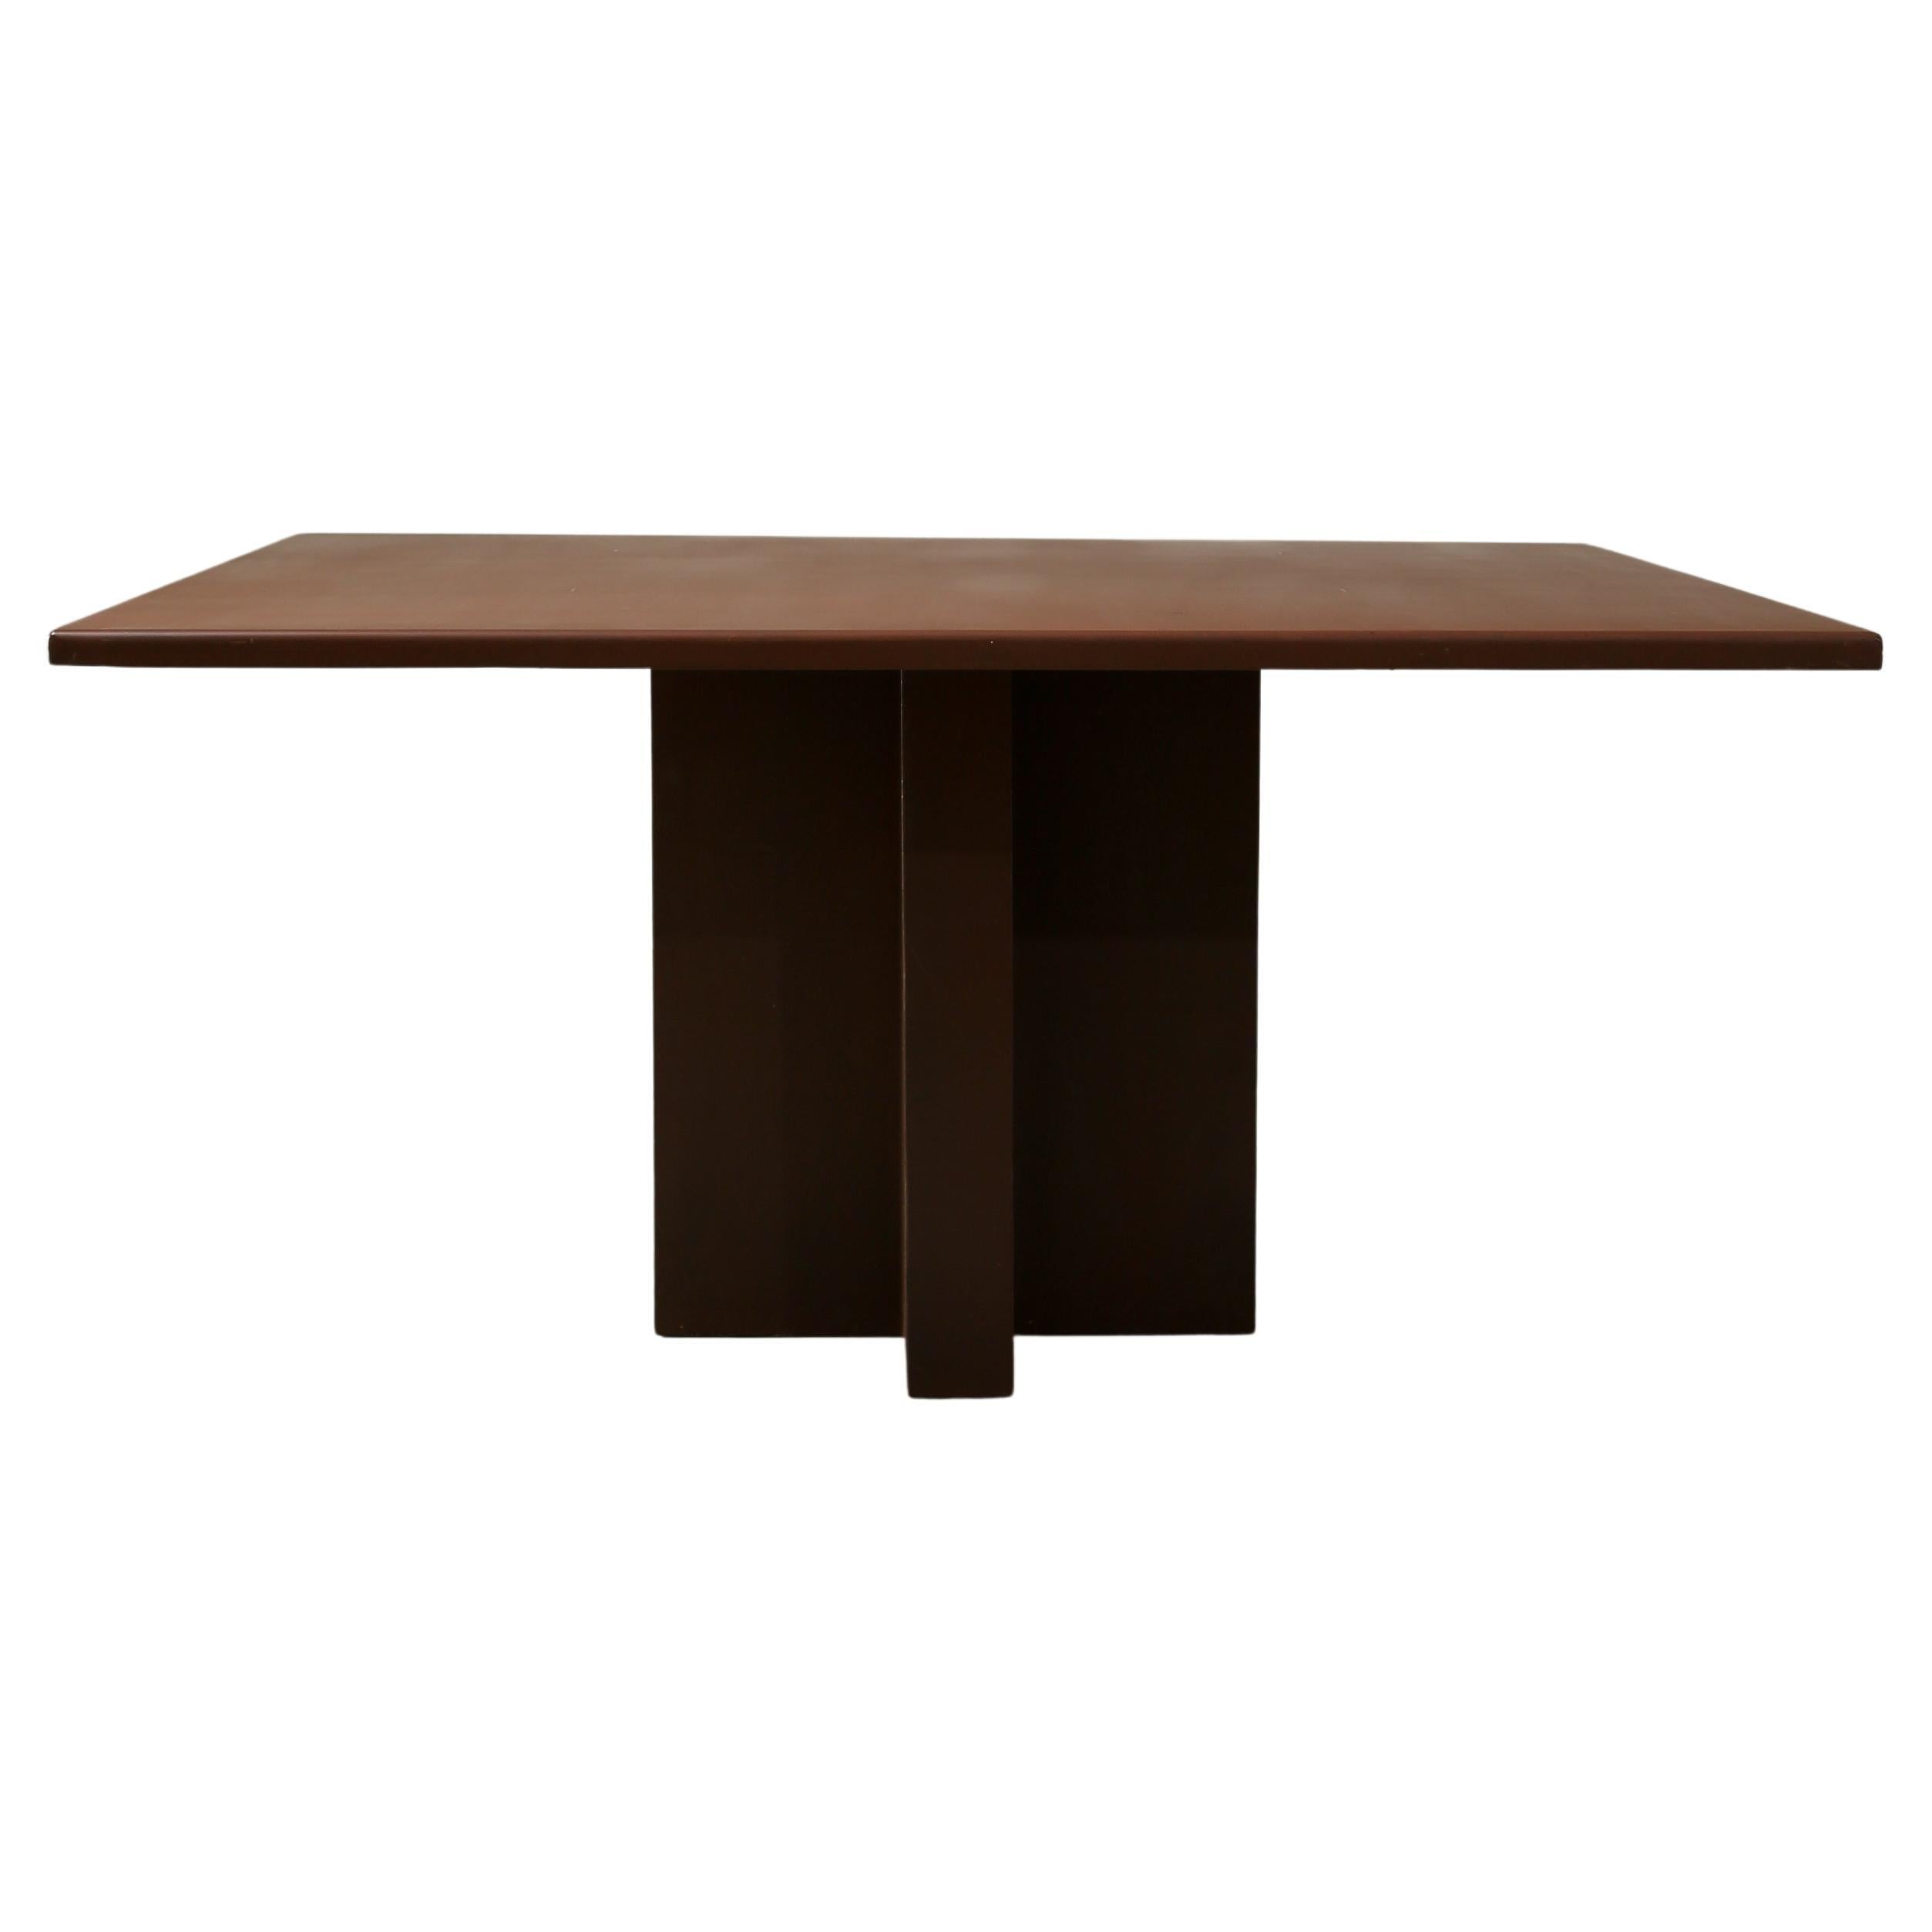 Jack A. Chandler Powder-Coated Square Steel Table For Sale